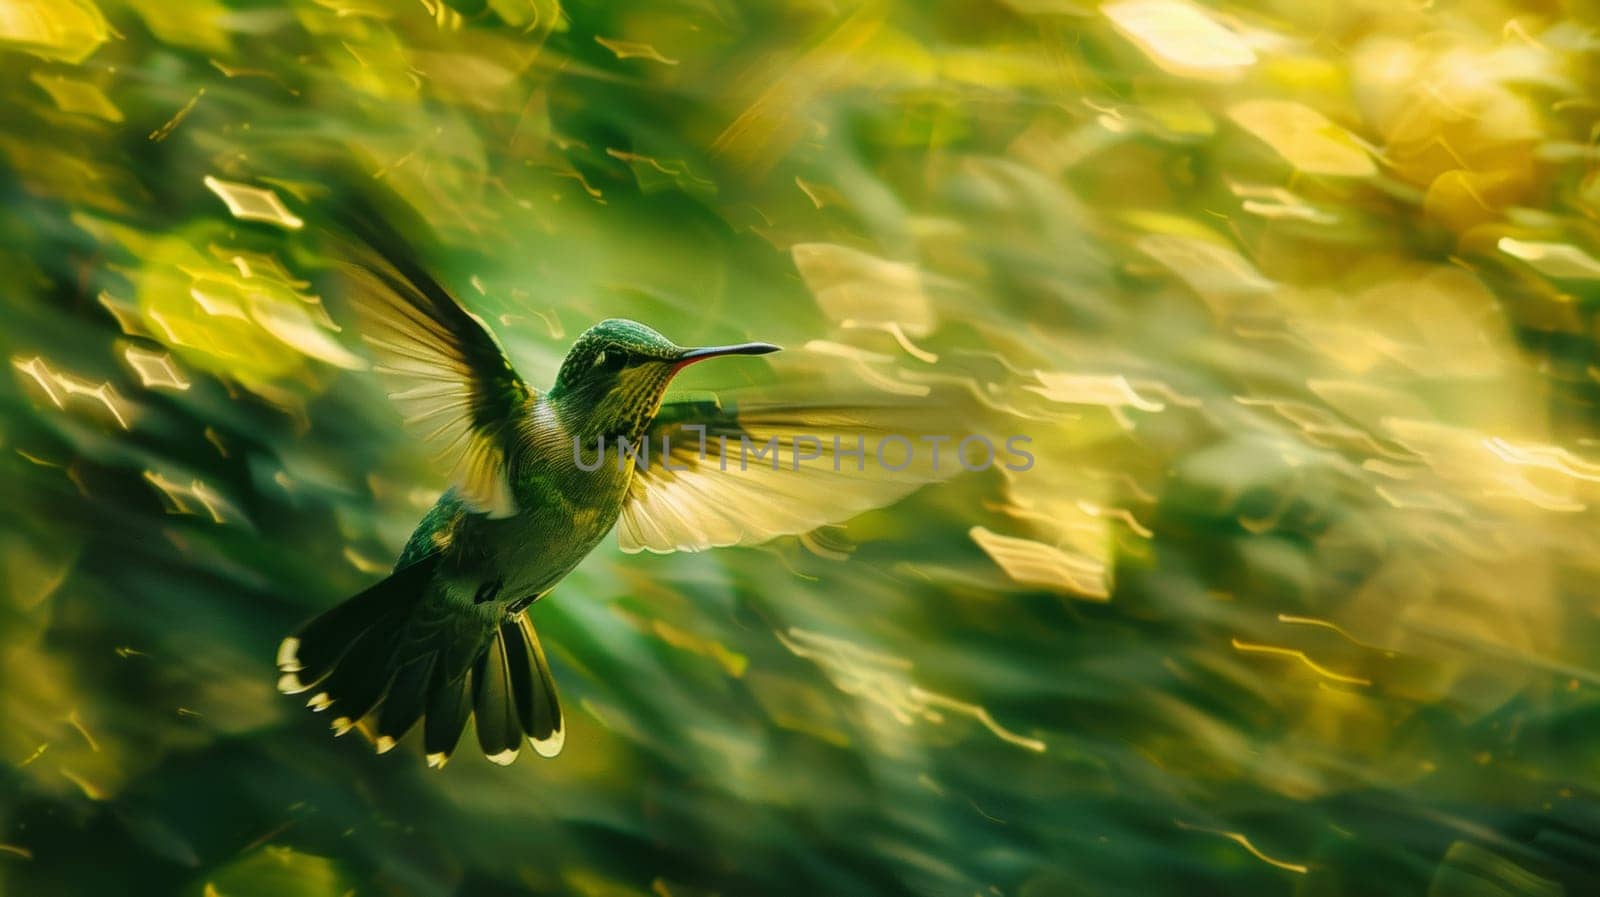 A hummingbird flying in the air with its wings spread